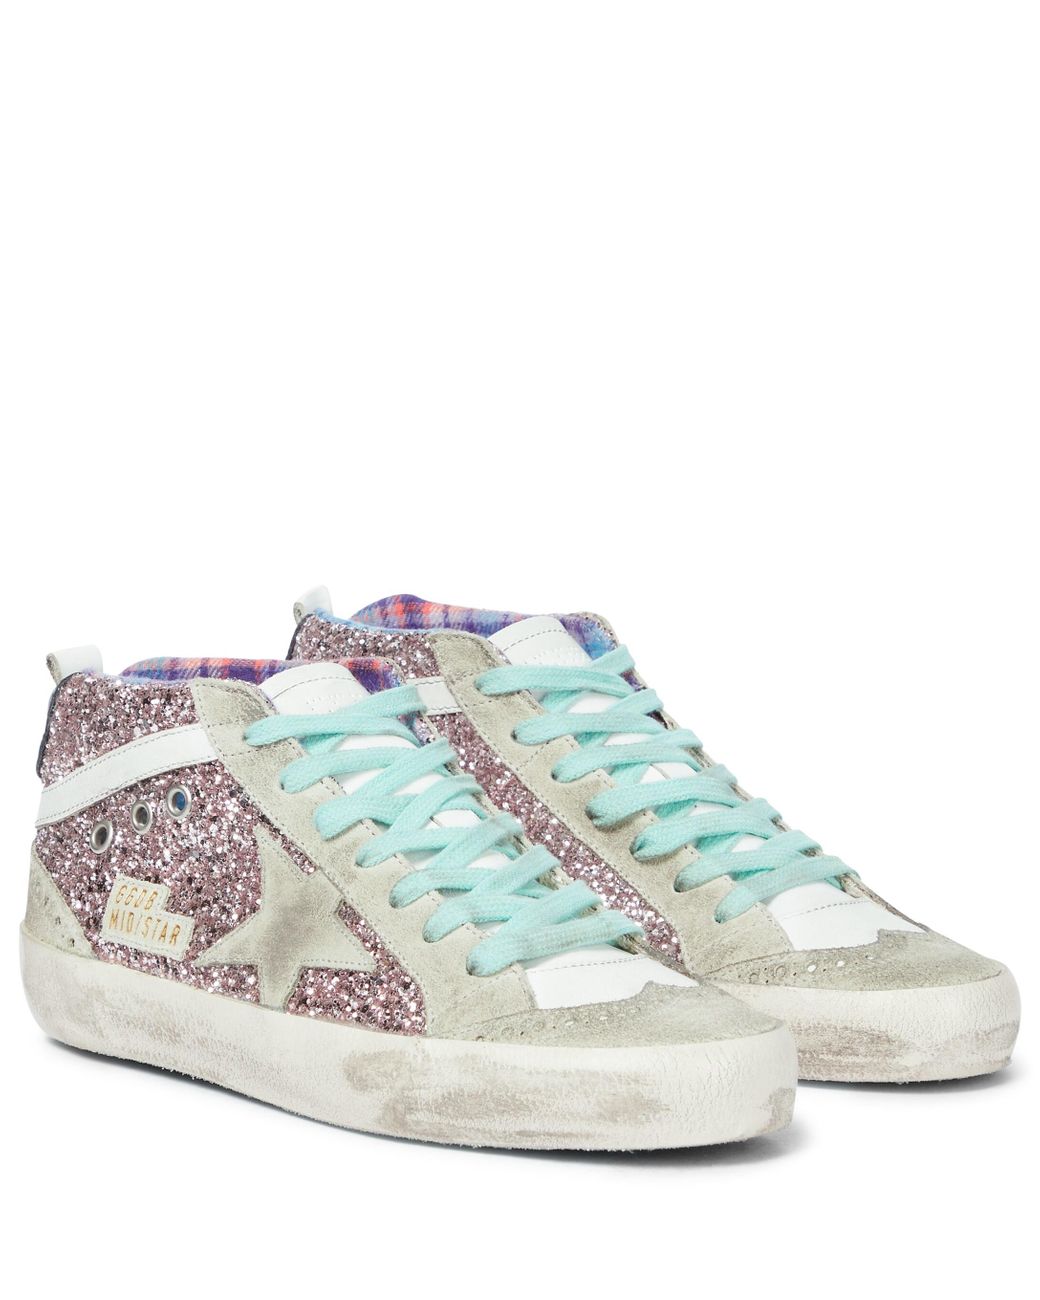 Golden Goose Mid Star Glitter And Leather Sneakers in Pink | Lyst